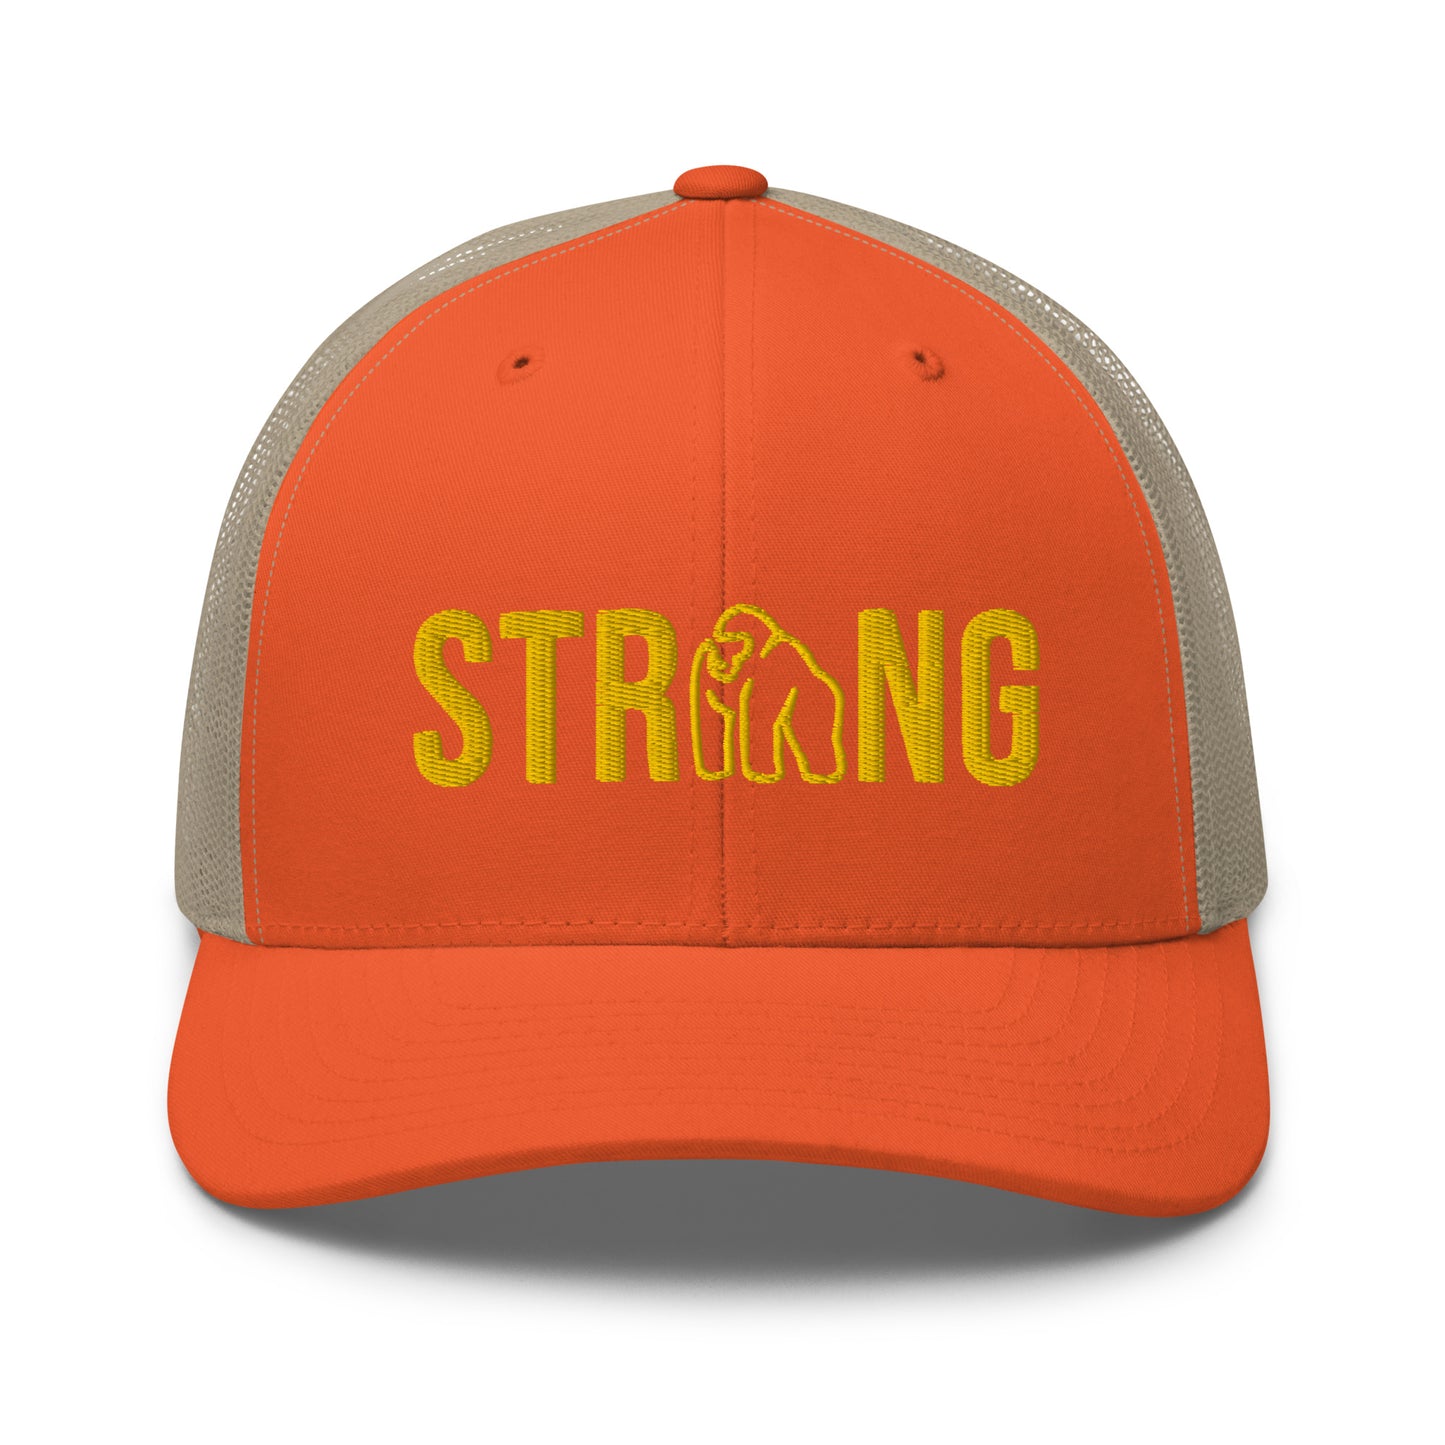 Ape Strong Hat with Gold Embroidery in Rustic Orange and Khaki